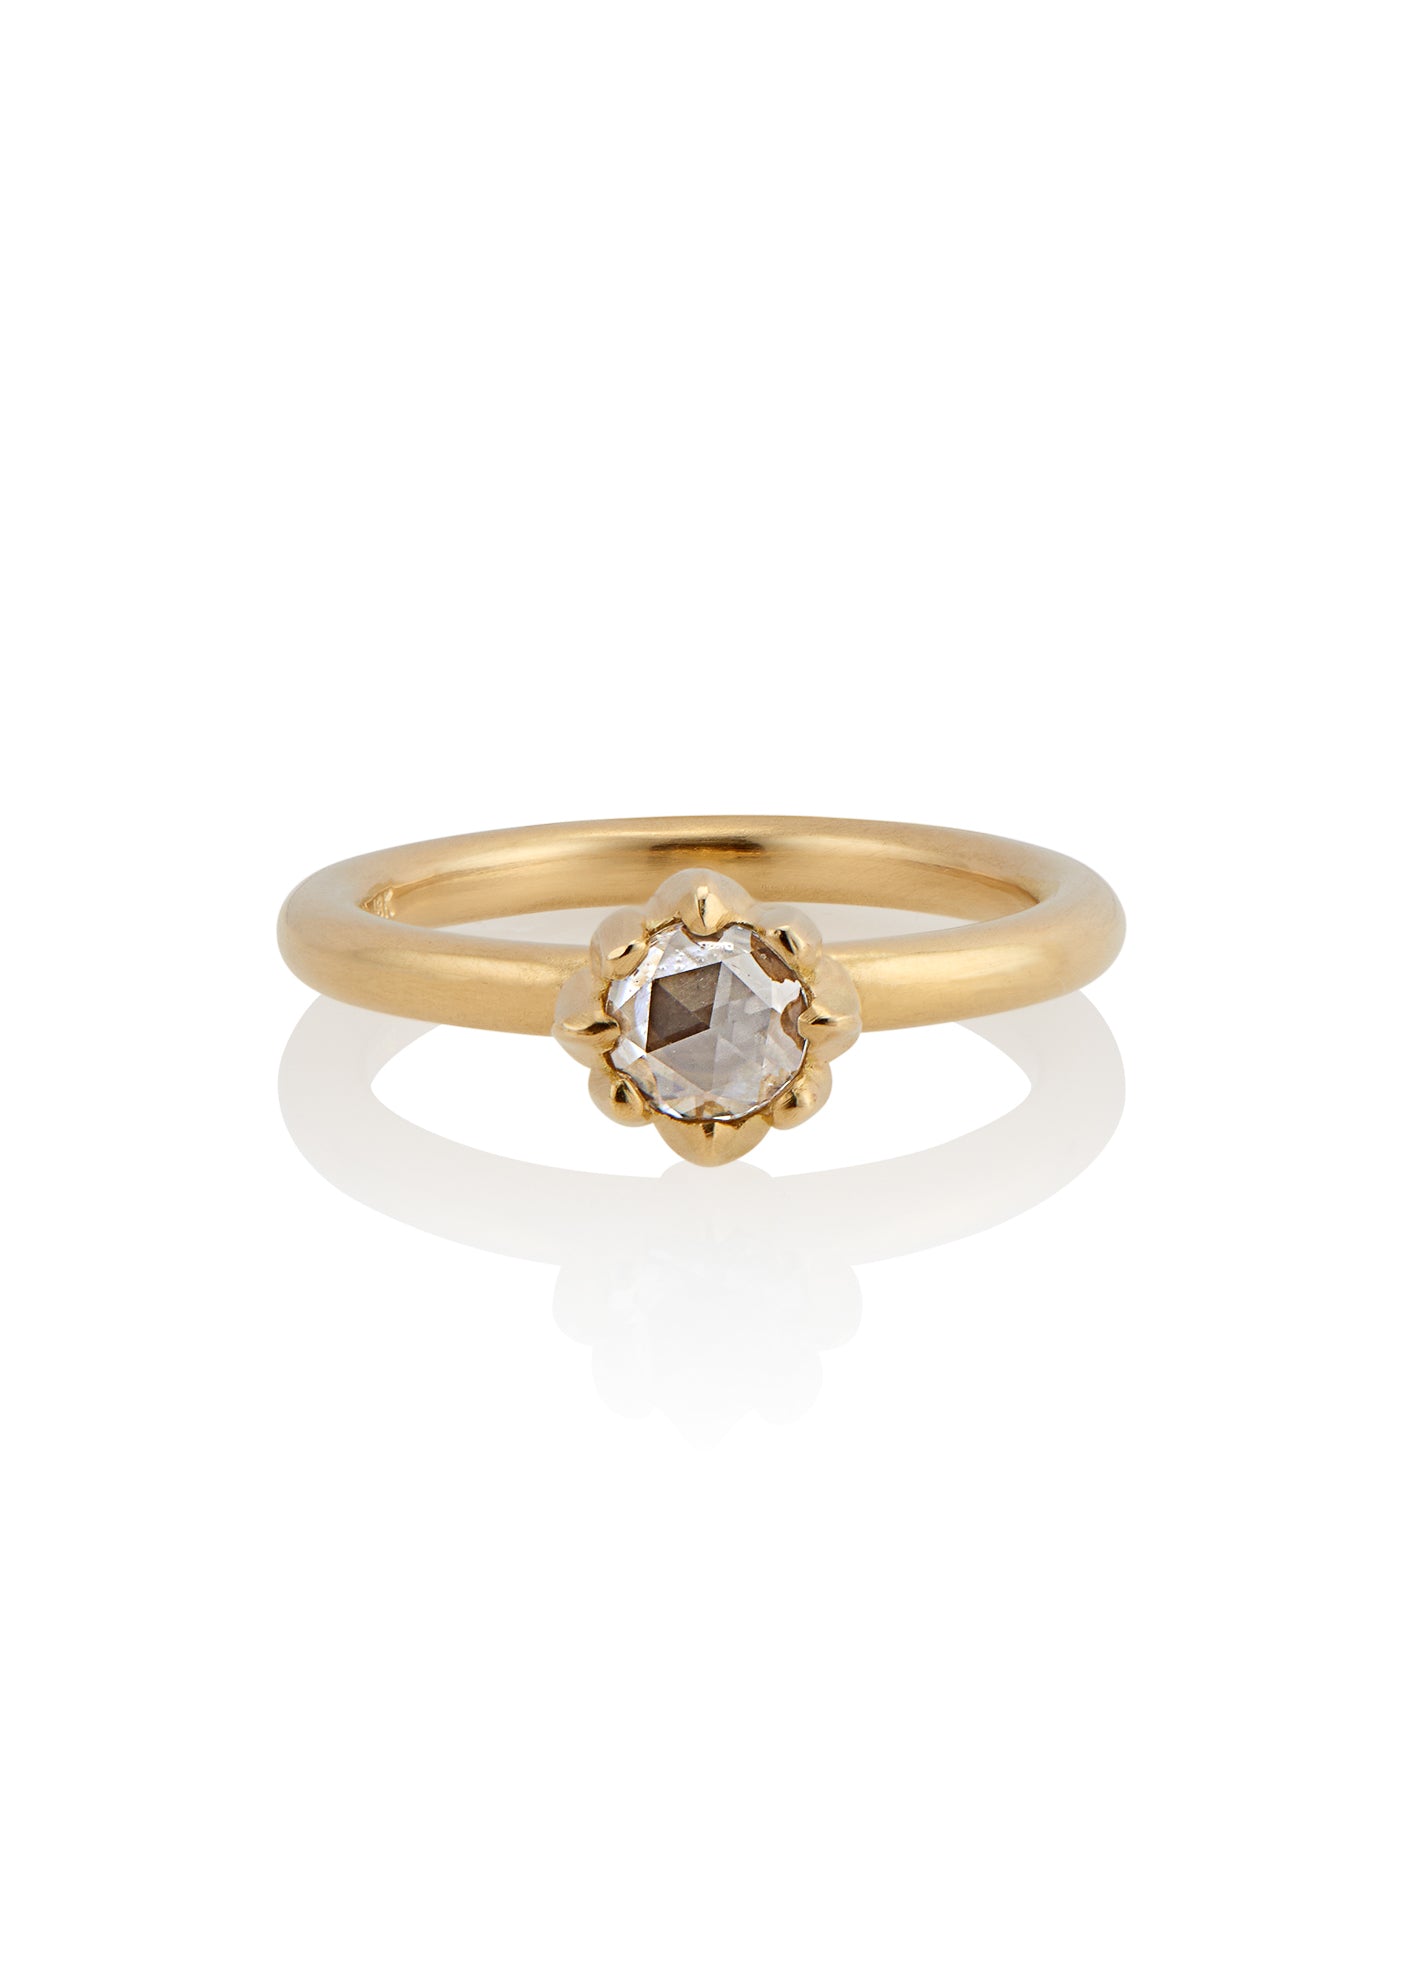 In simplicity, majesty is revealed. Inspired by the stark and graphic botanical photographs of Karl Blossfeldt, the Fleur ring creates a striking silhouette on the finger, its clean gold band showcasing a regal and romantic rose cut diamond. 